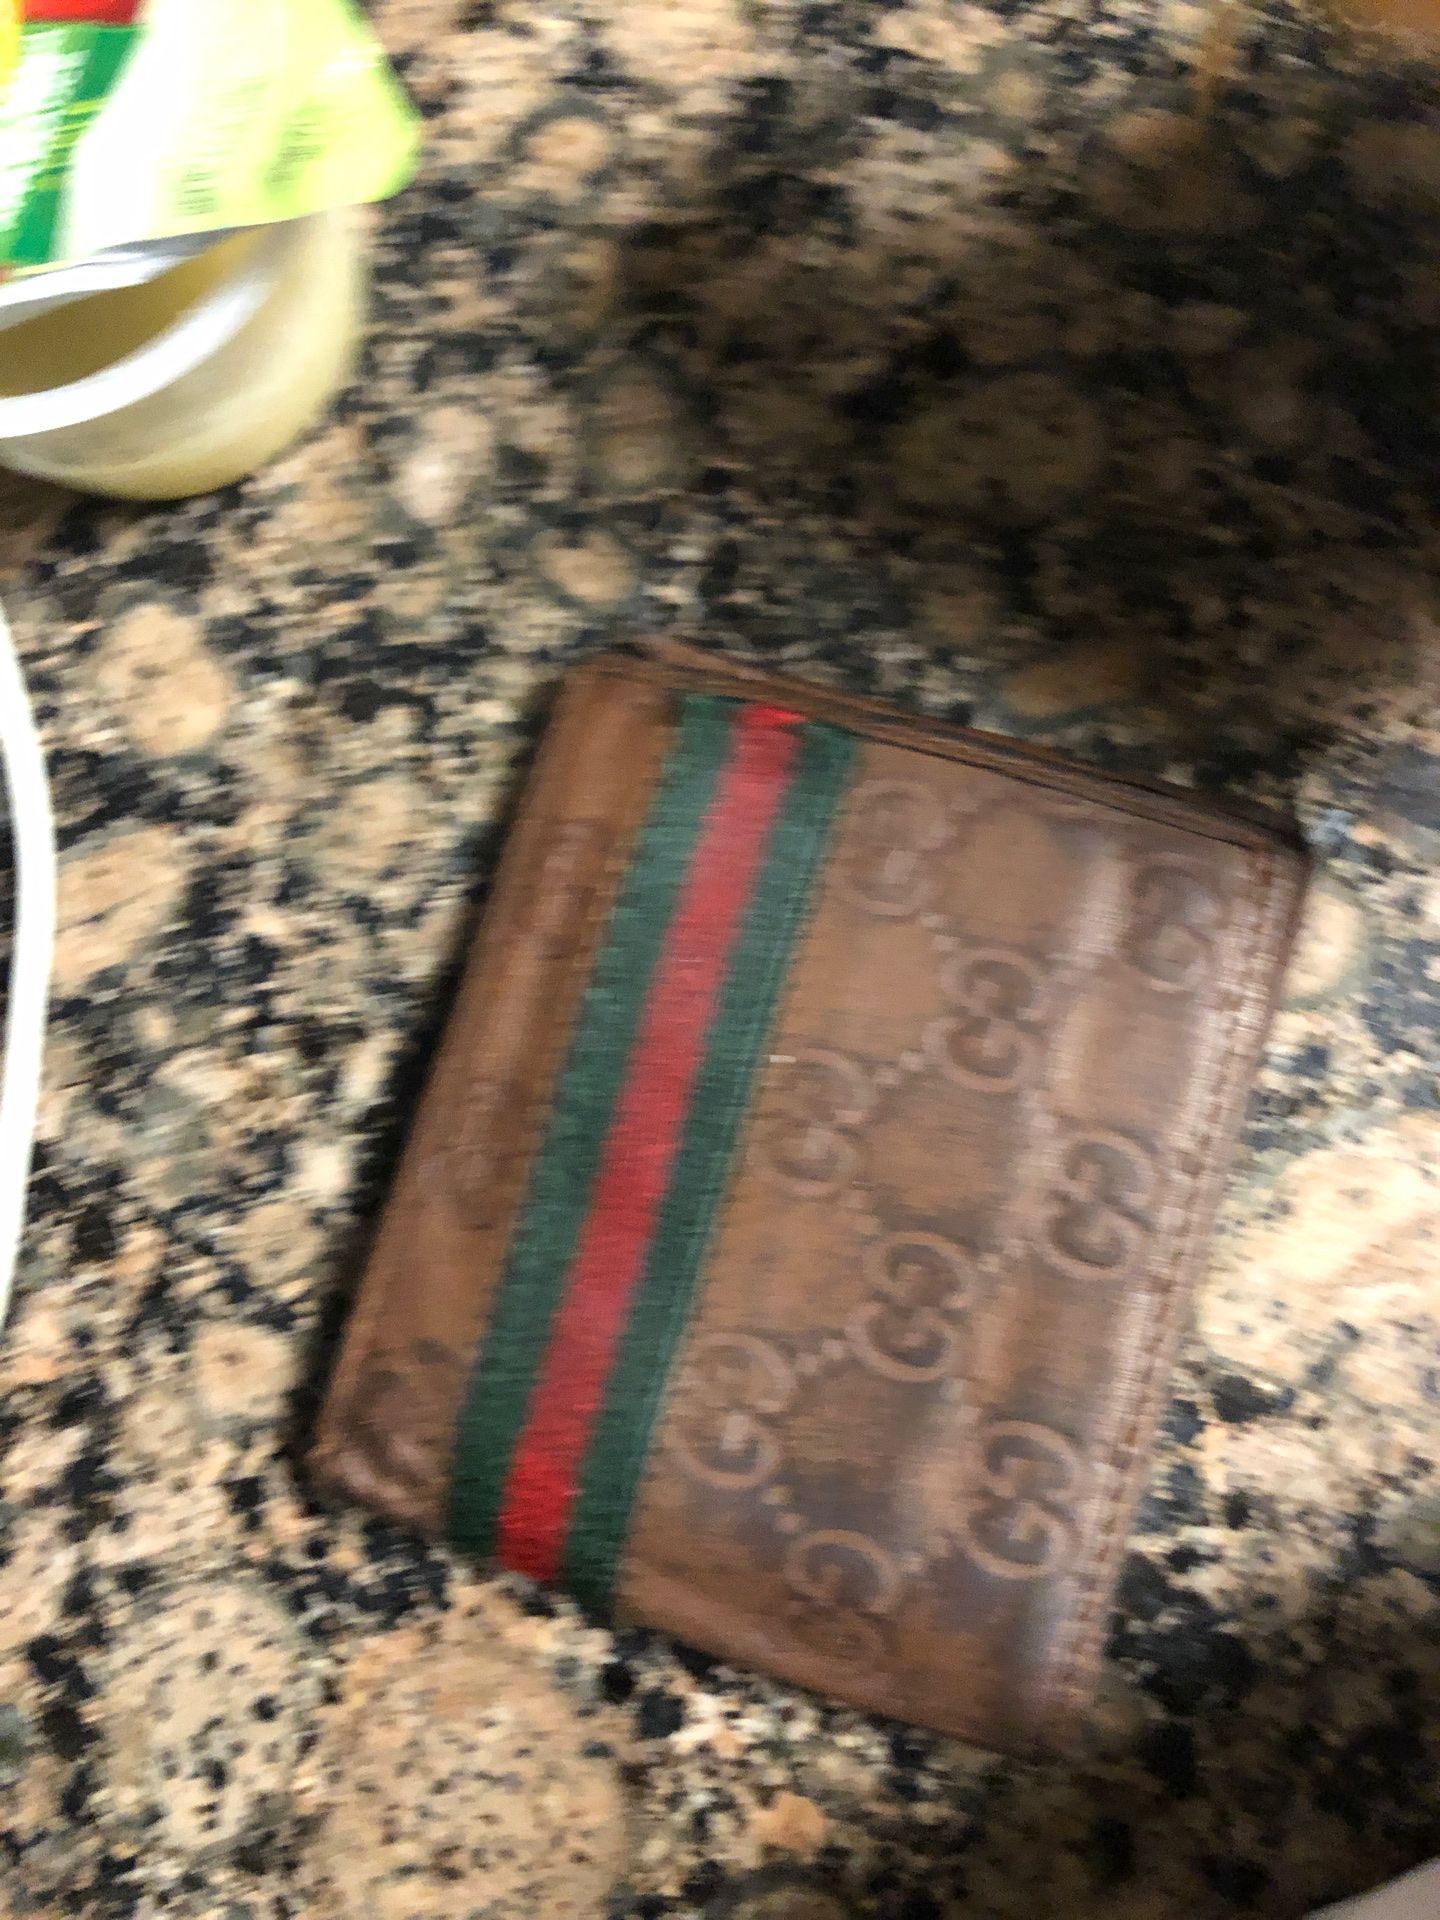 Supreme Gucci wallet,,, real authentication # inside wallet